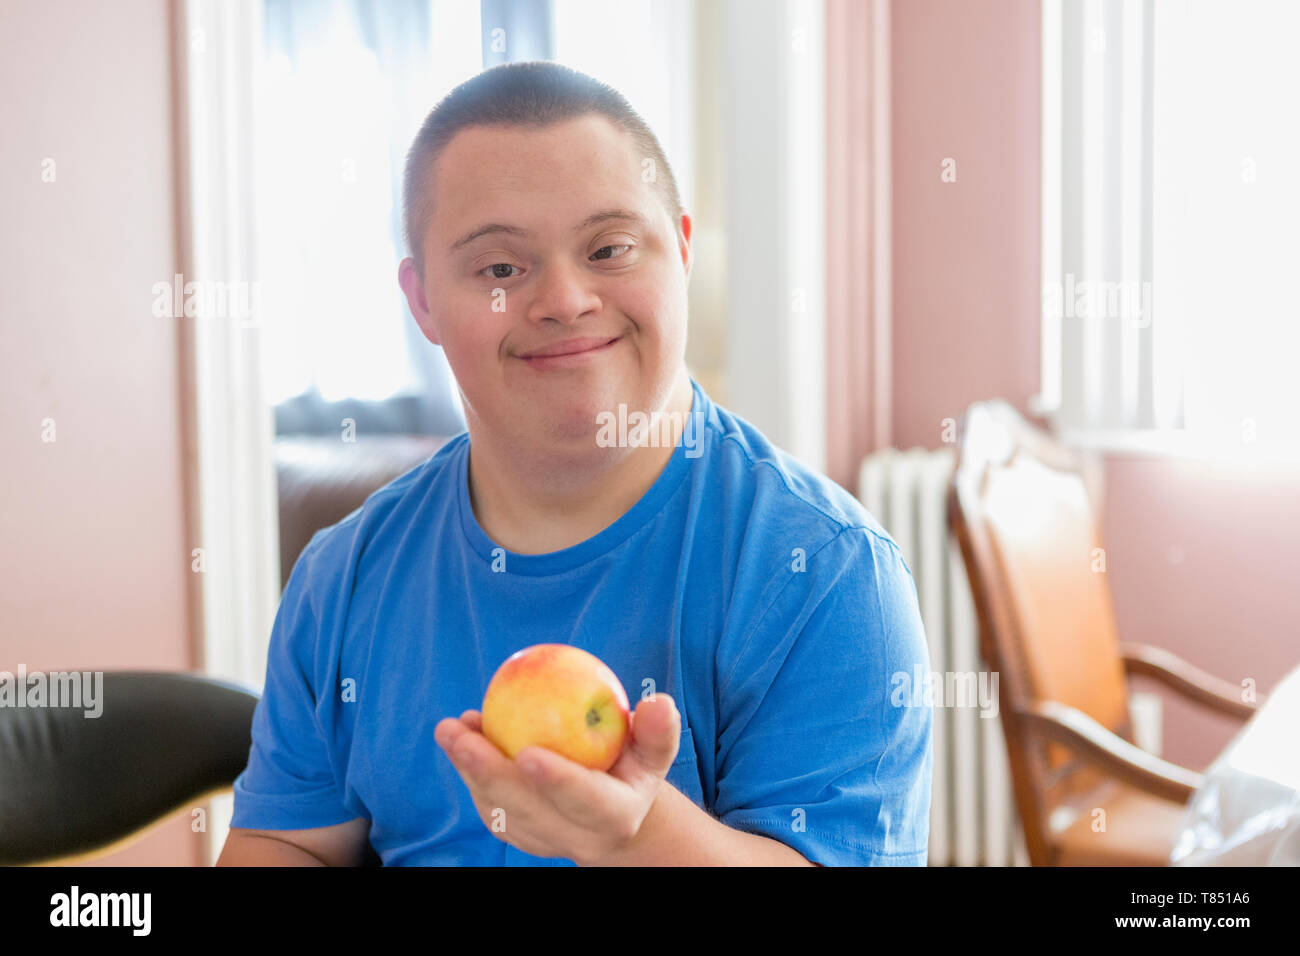 Mit Down Syndrom holding Obst jugendlich Stockfoto